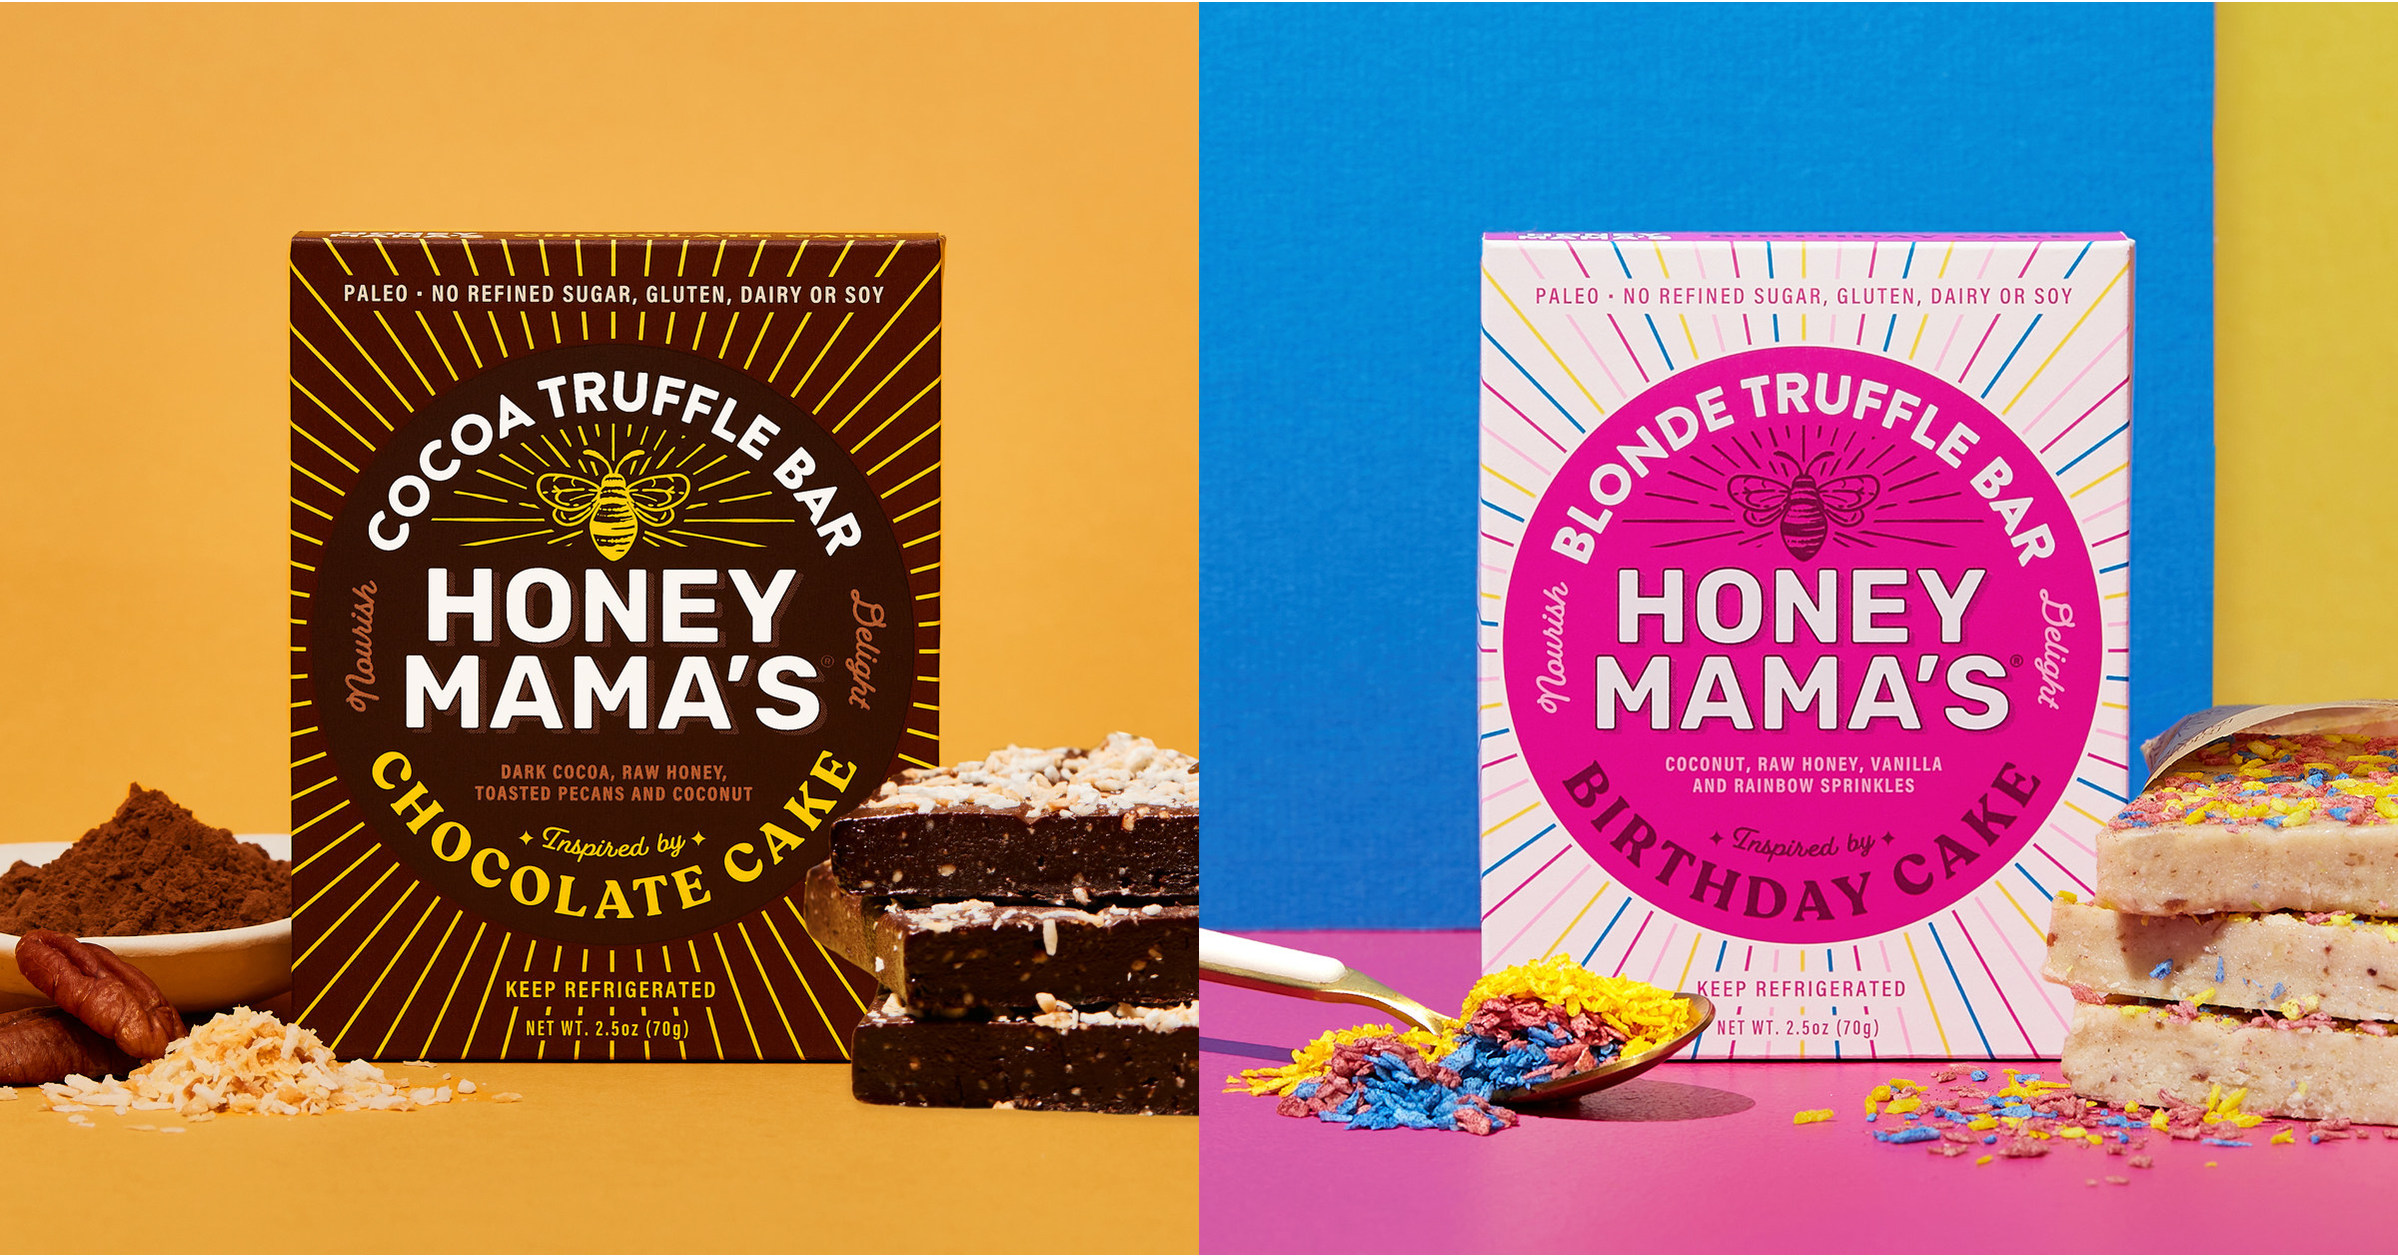 Honey Mama's Releases New Cake Series at Sprouts Farmers Markets